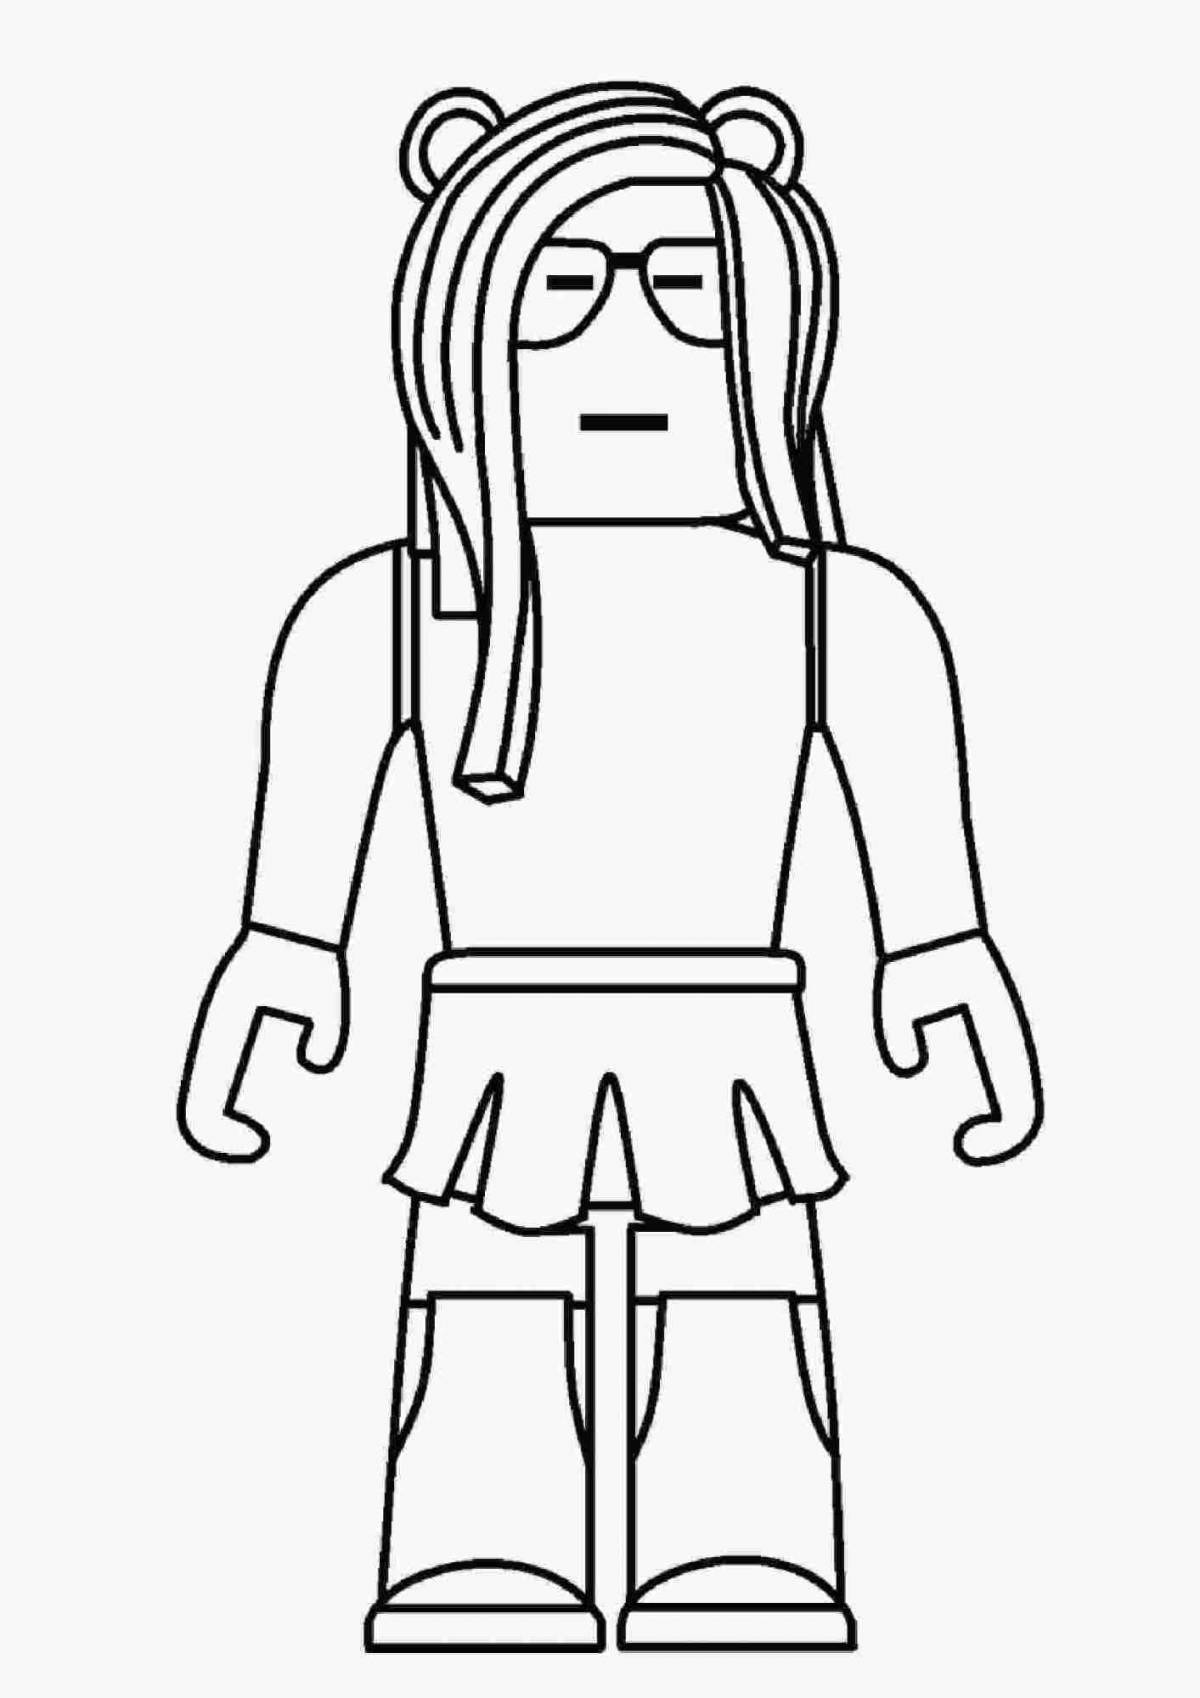 Playful roblox girl coloring page